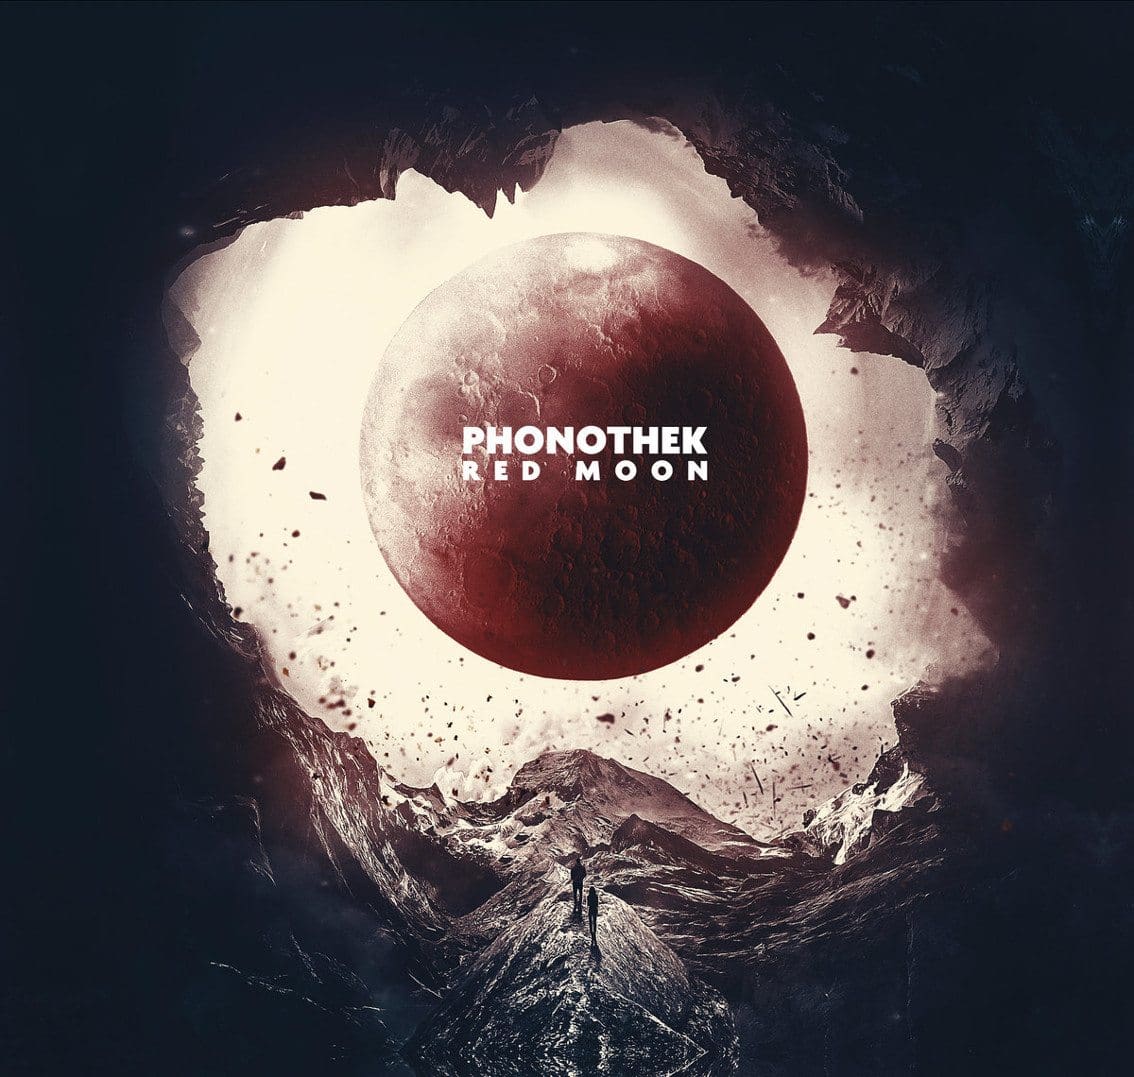 Phonothek issues 2nd album 'Red Moon' on Cryo Chamber - preview it on Side-Line